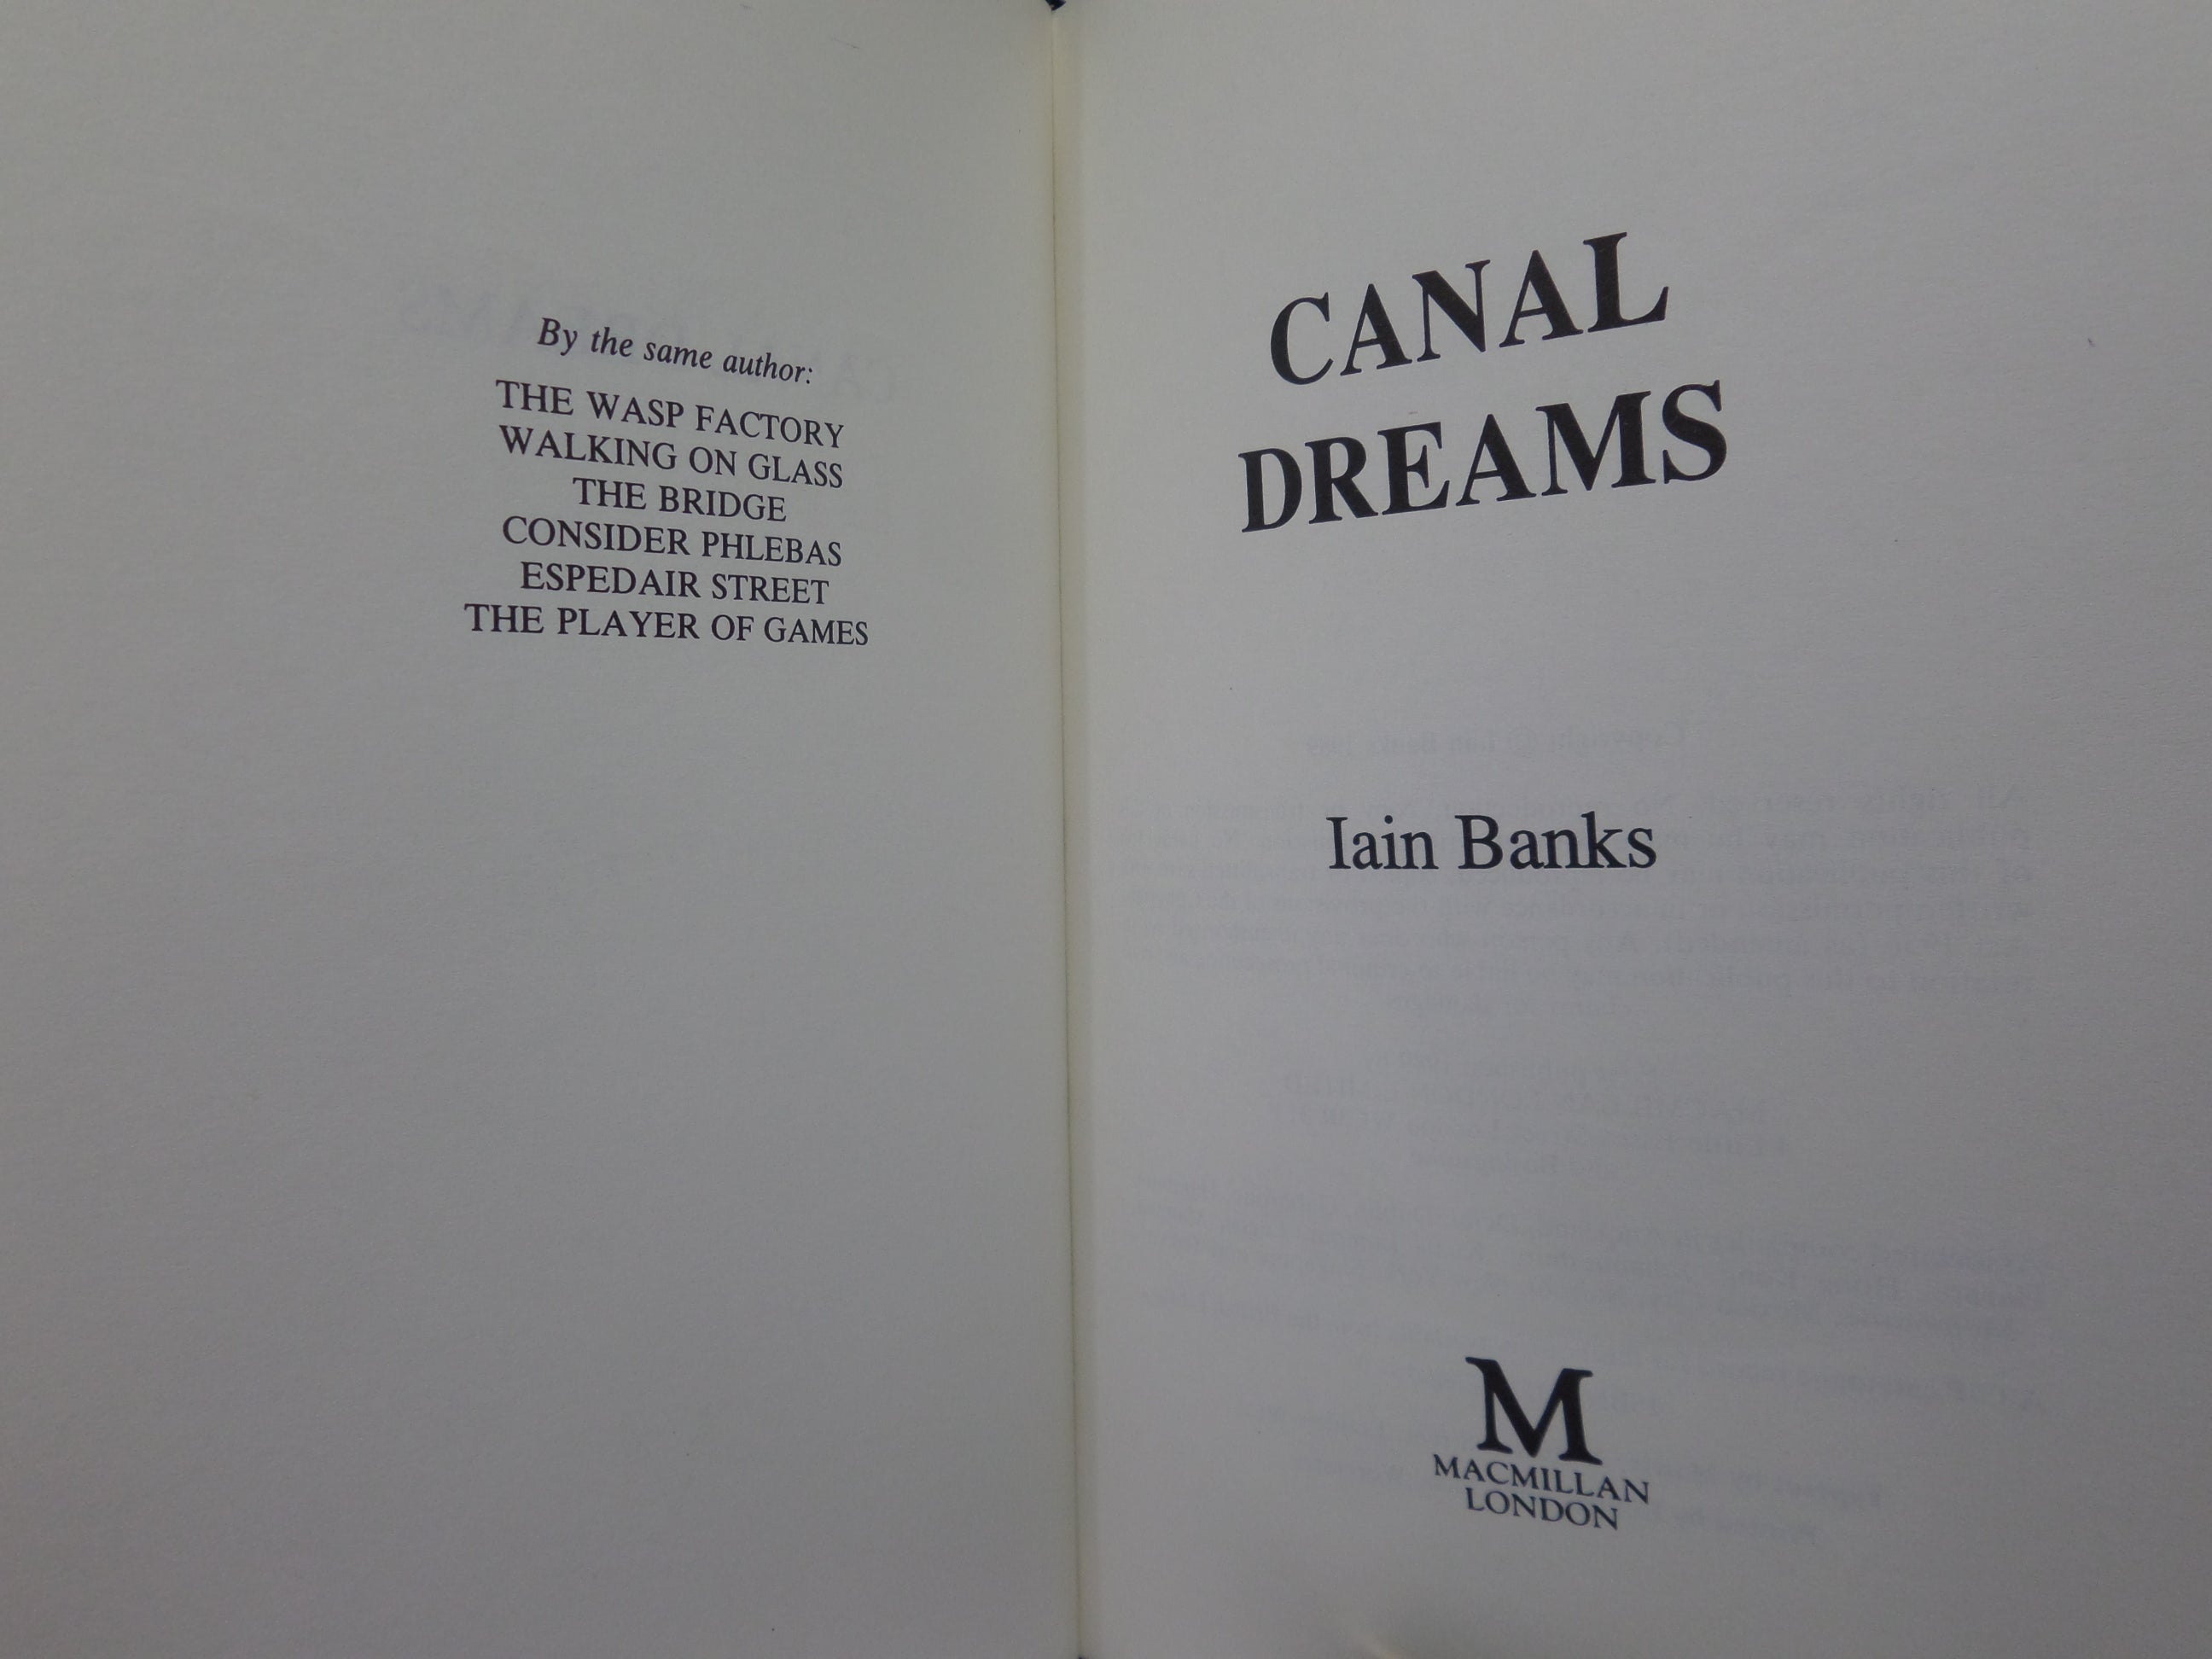 CANAL DREAMS BY IAIN BANKS 1989 FIRST EDITION HARDCOVER